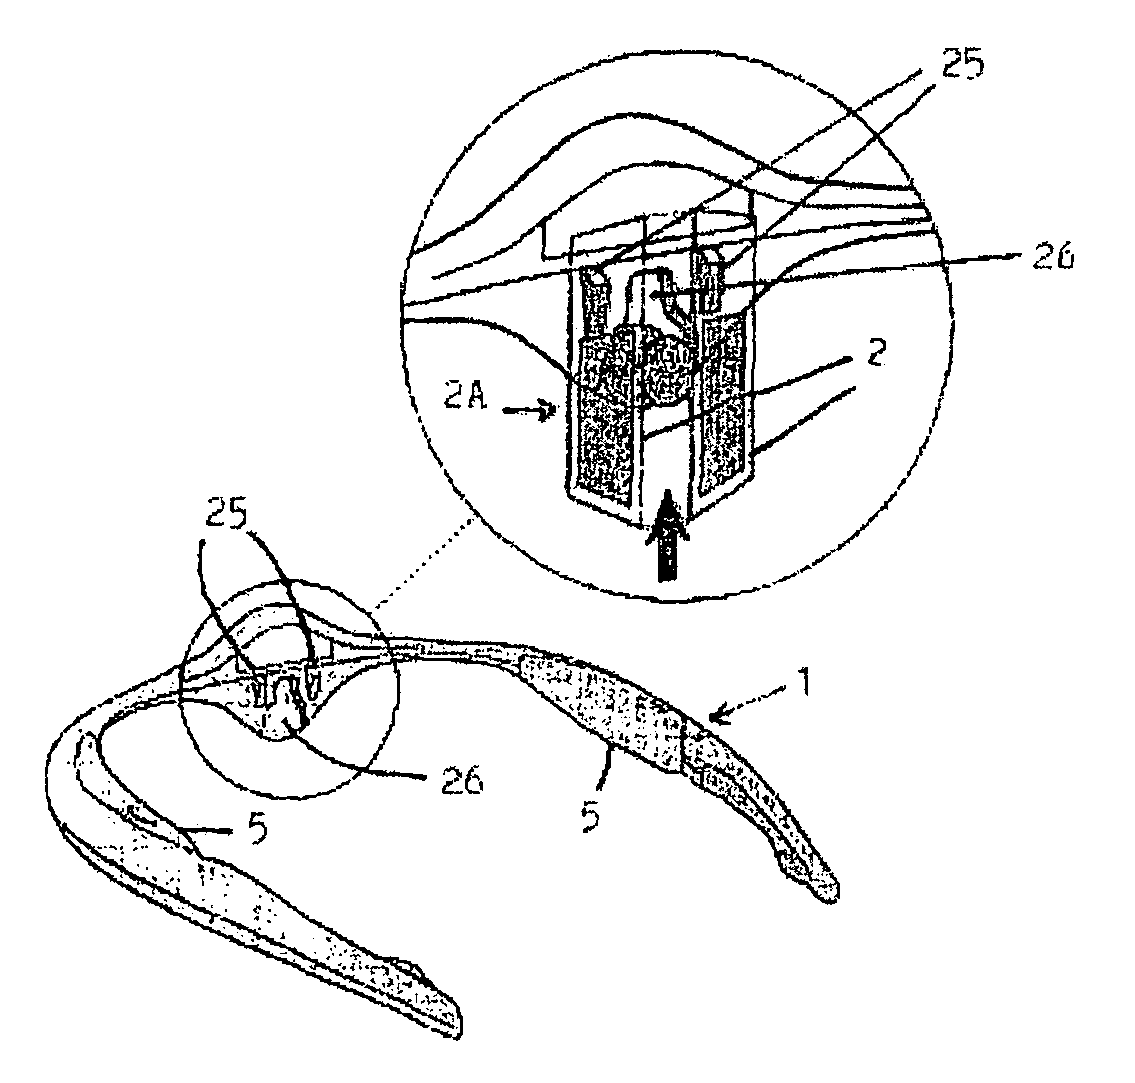 Apparatus for electro-inhibition of facial muscles